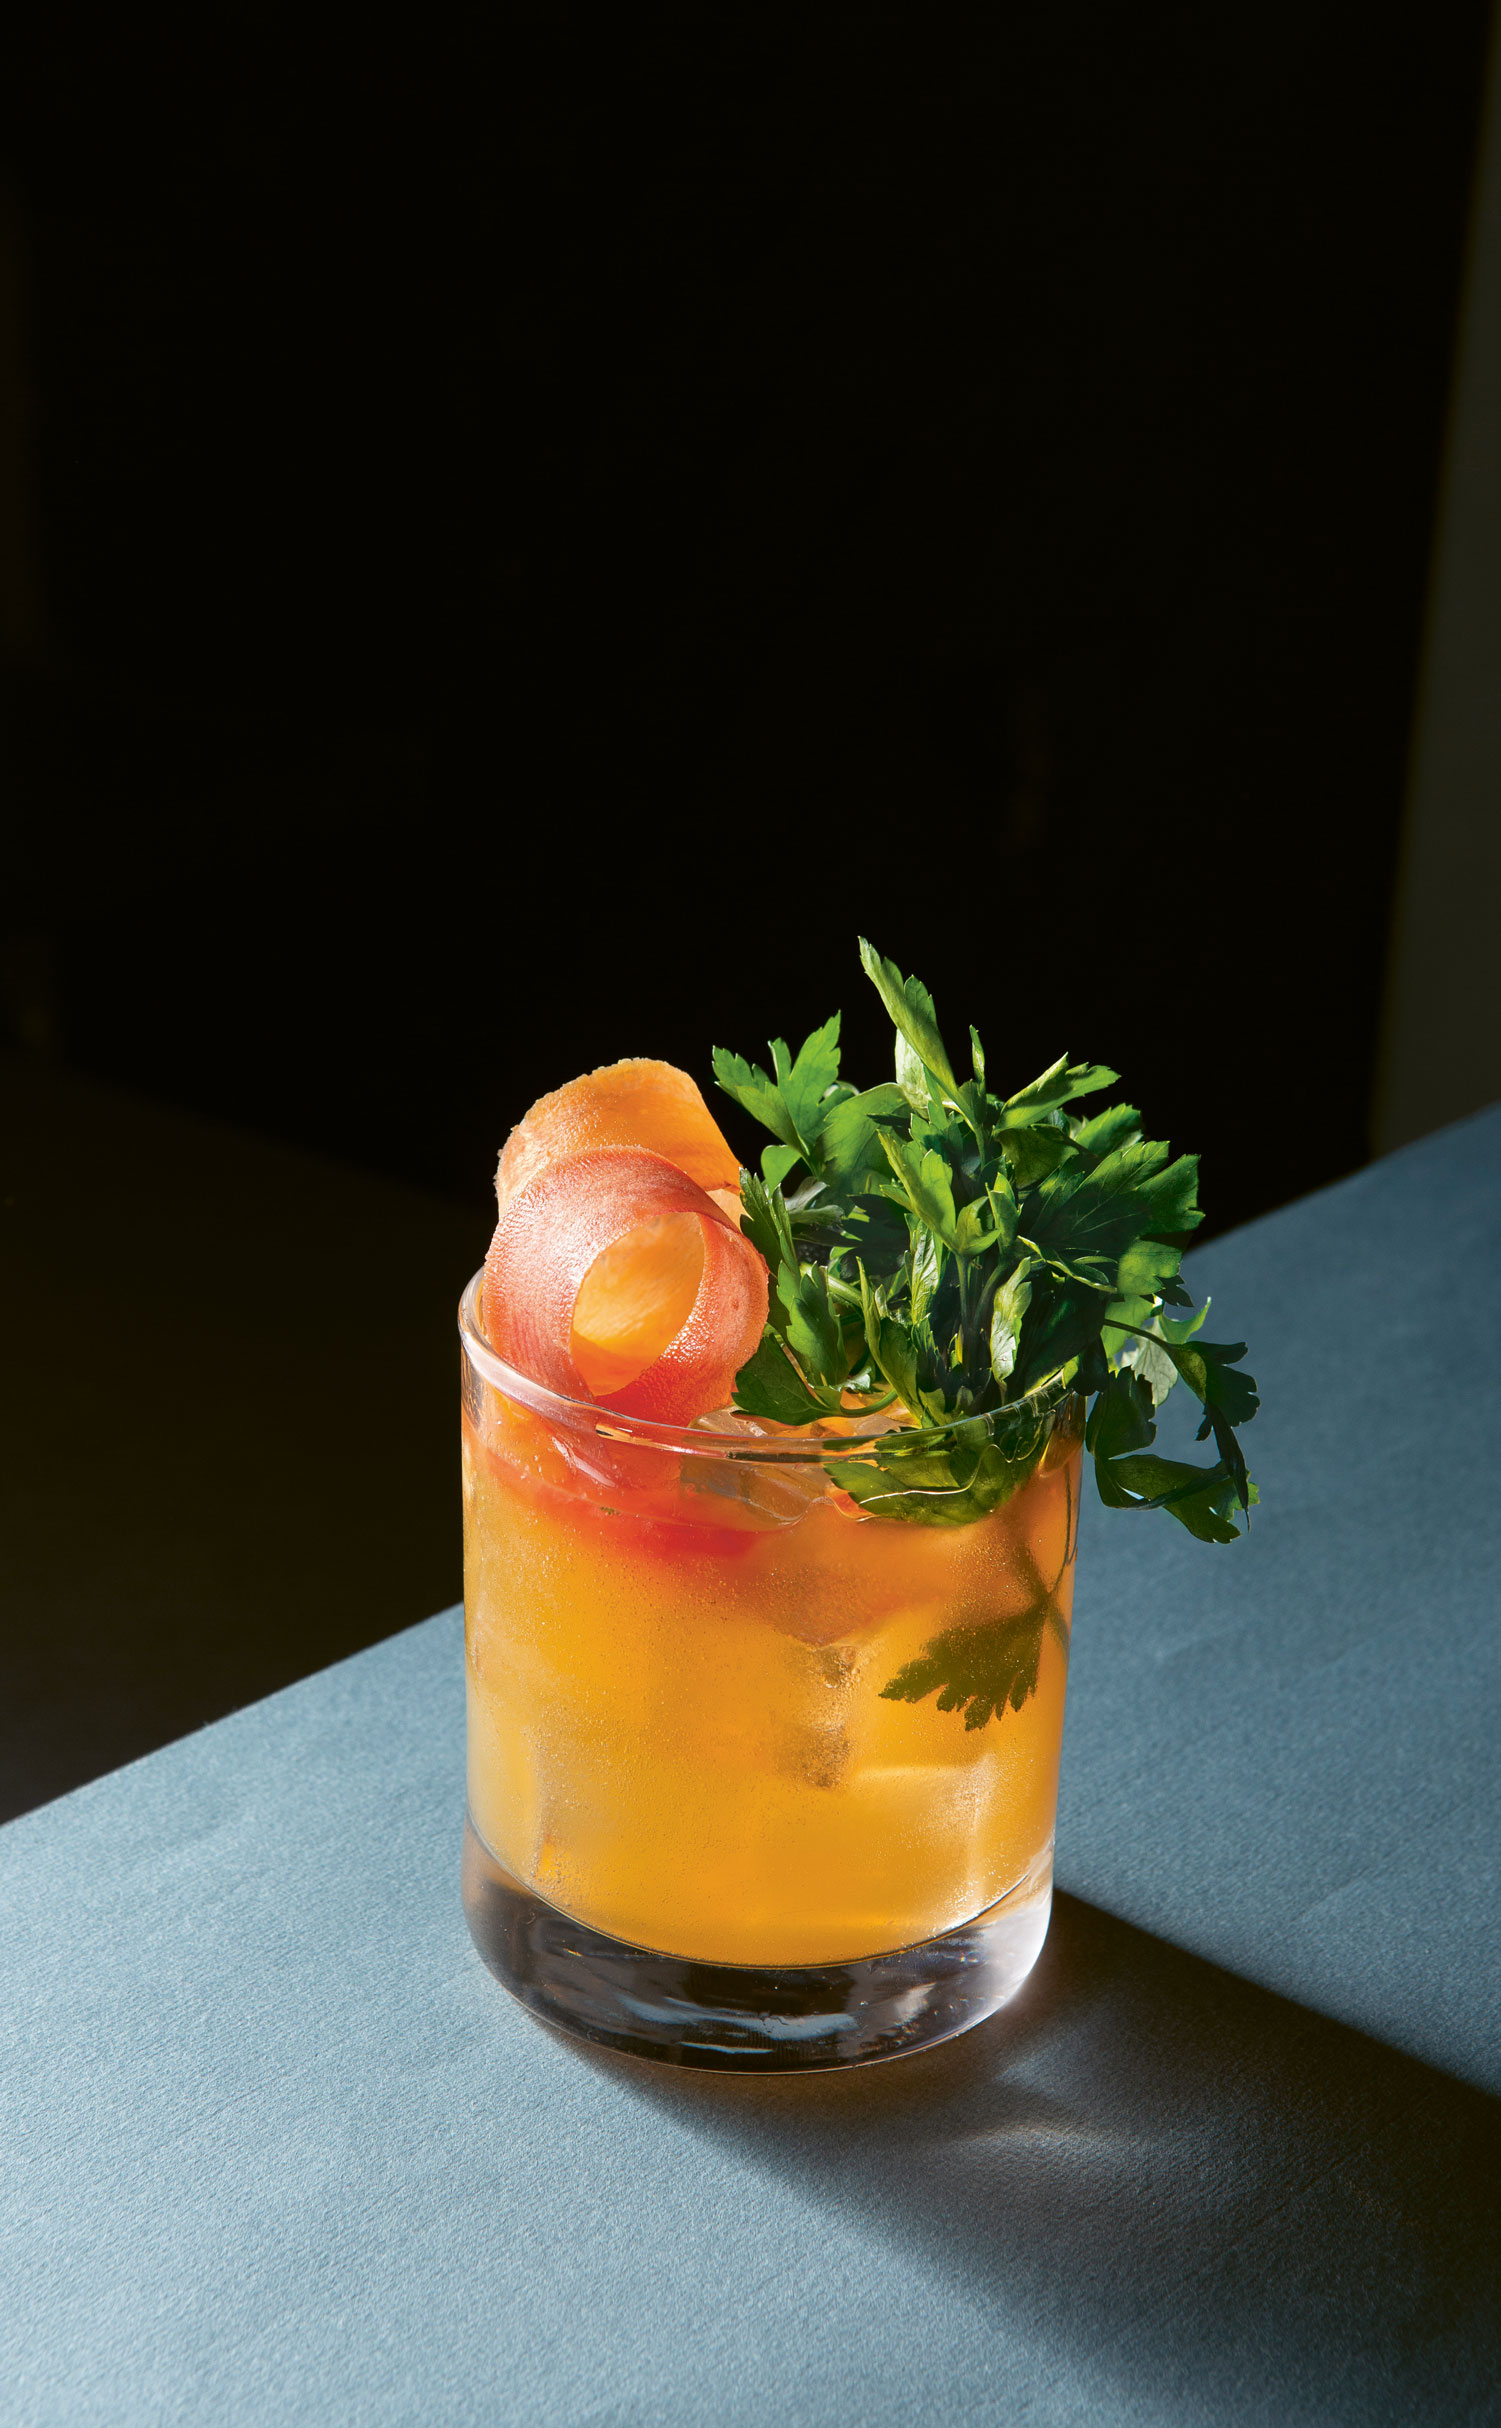 Carrot spritz. A non-alcoholic spritz from the Savannah outpost of The Fat Radish restaurant, which combines the sweet earthiness of fresh-from-the-ground carrots with spicy ginger. All photographs by Andy Sewell